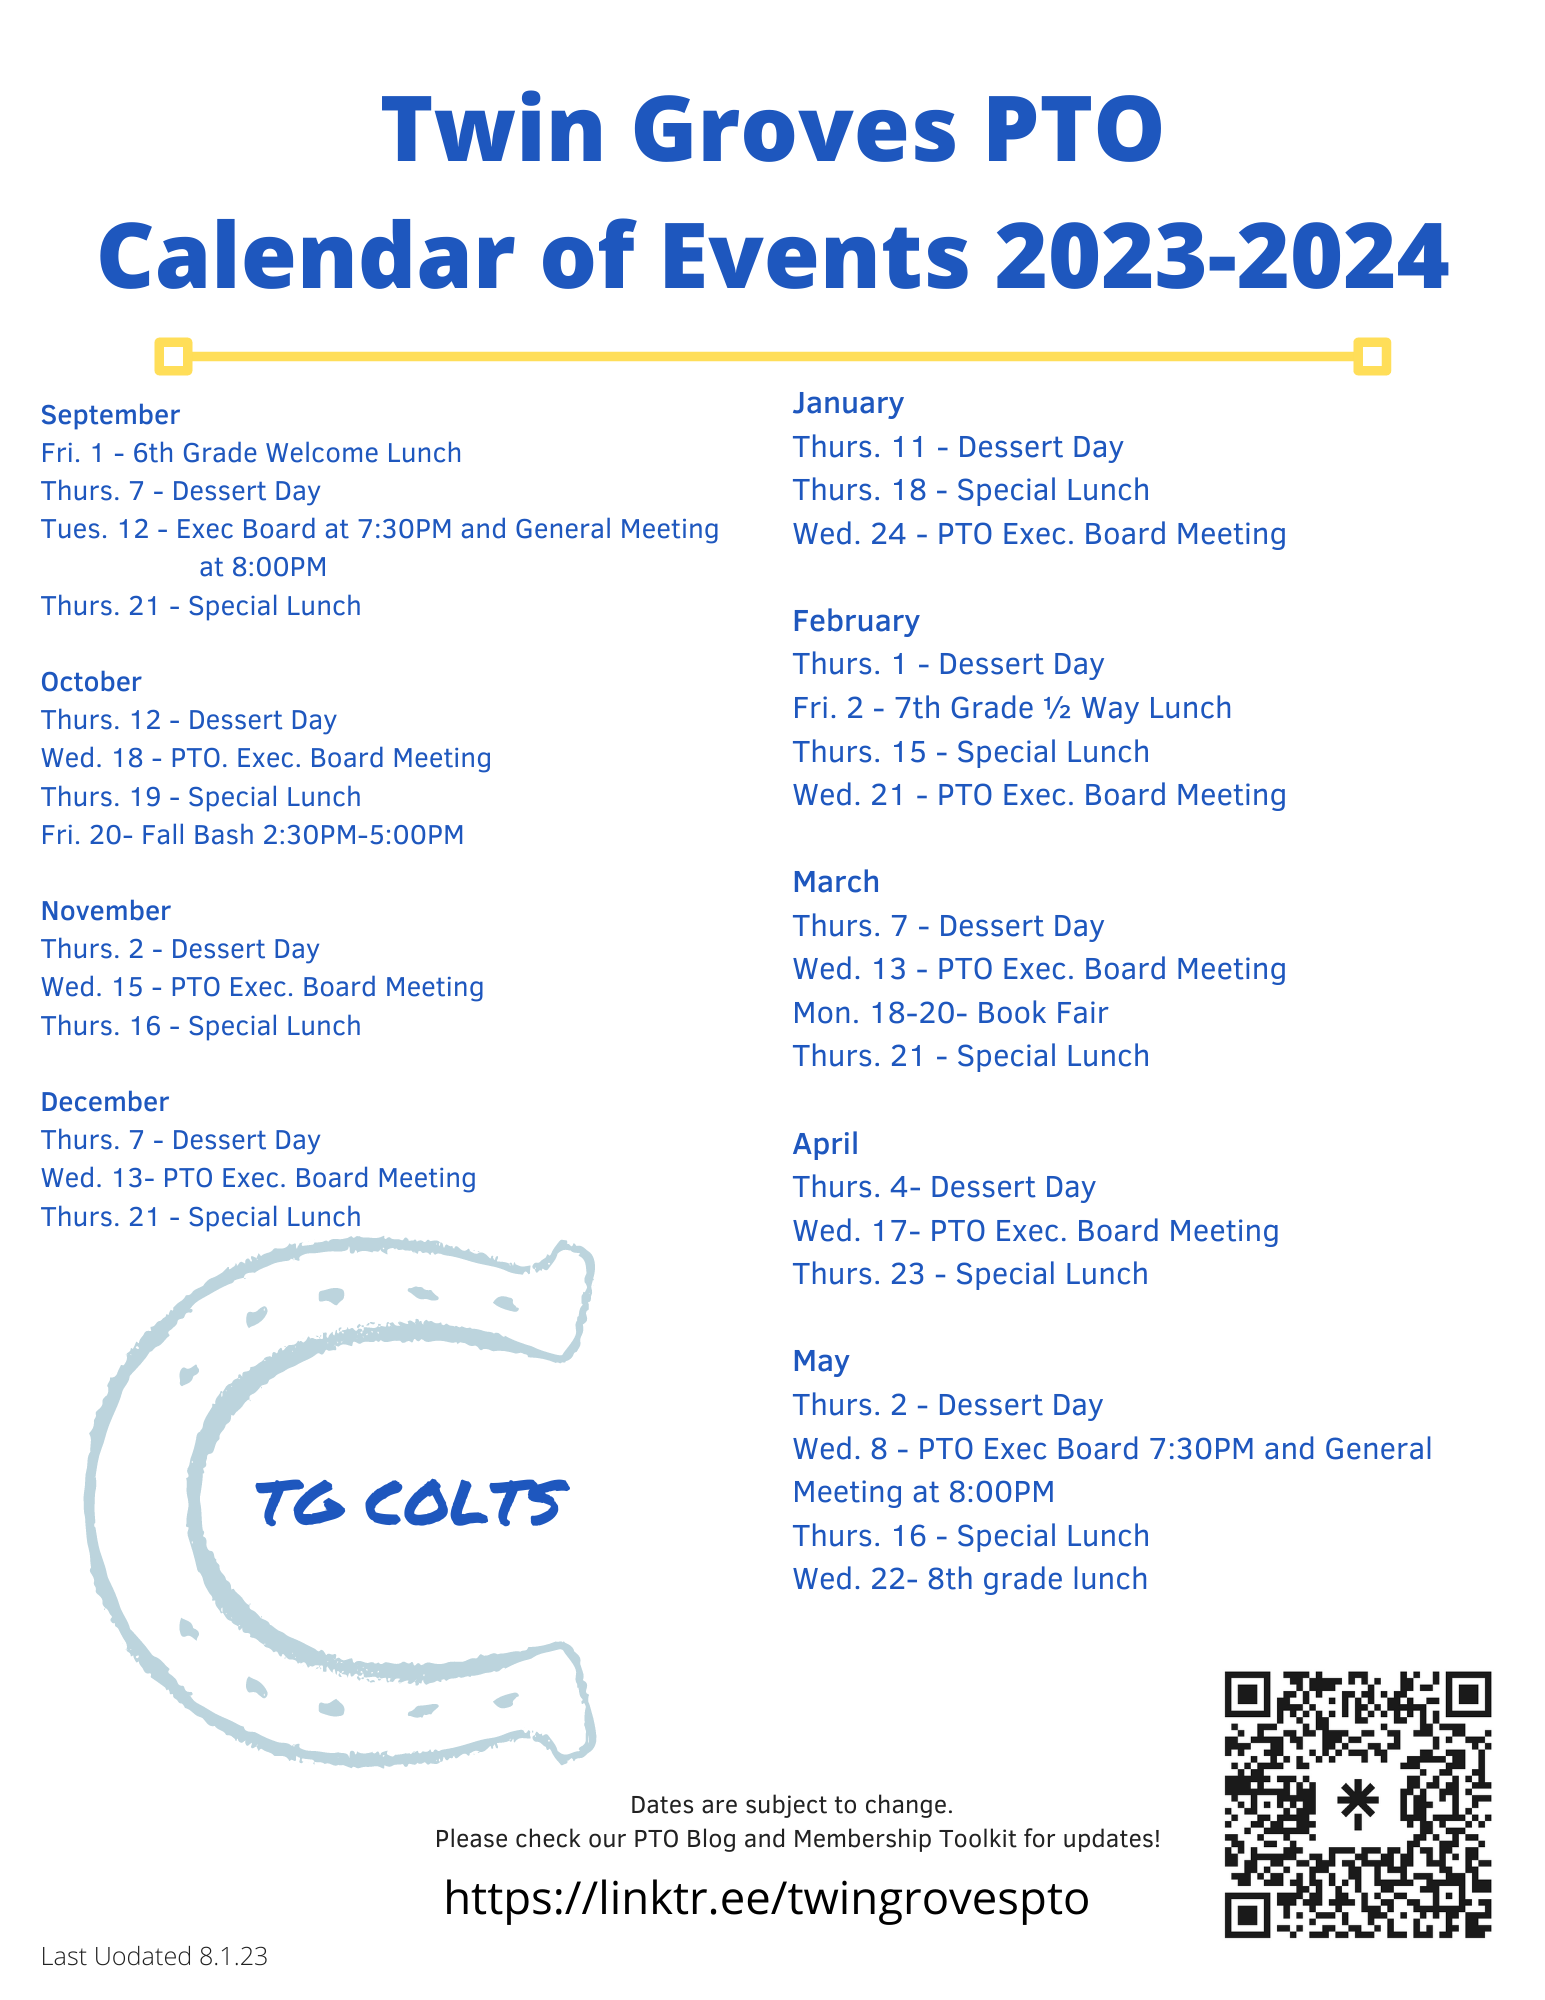 Twin Groves Calendar of Events August 24 2023